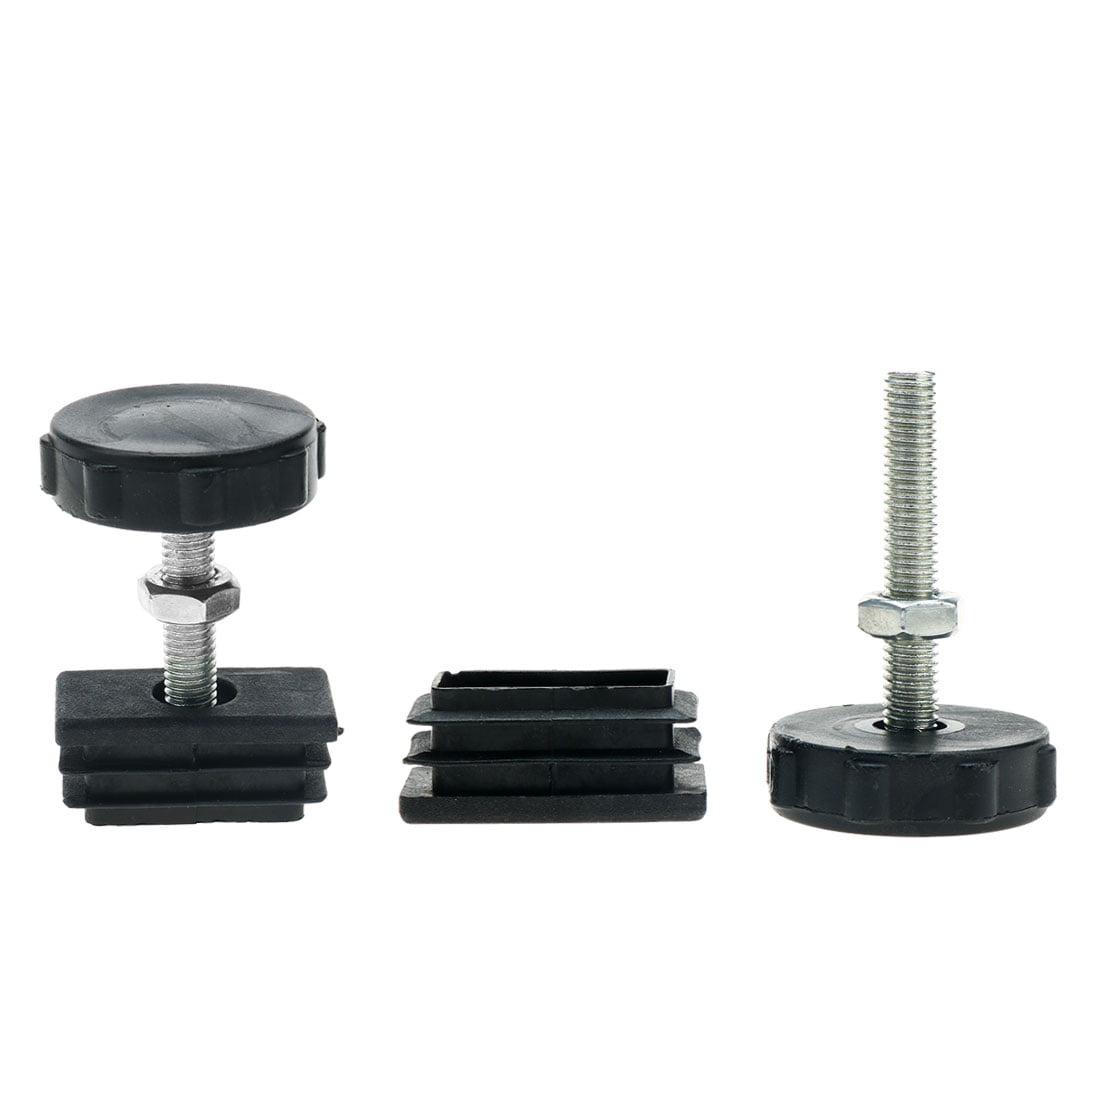 Leveling foot. 4 X 35 mm Push Fit Square Table Legs Adjustable Levelling Screw feet foot Inserts Poland Franke. Screw Adjustable foot m10 40mm. Kit for Kit мебельная фурнитура. Round Adjustable Table massive Leg.